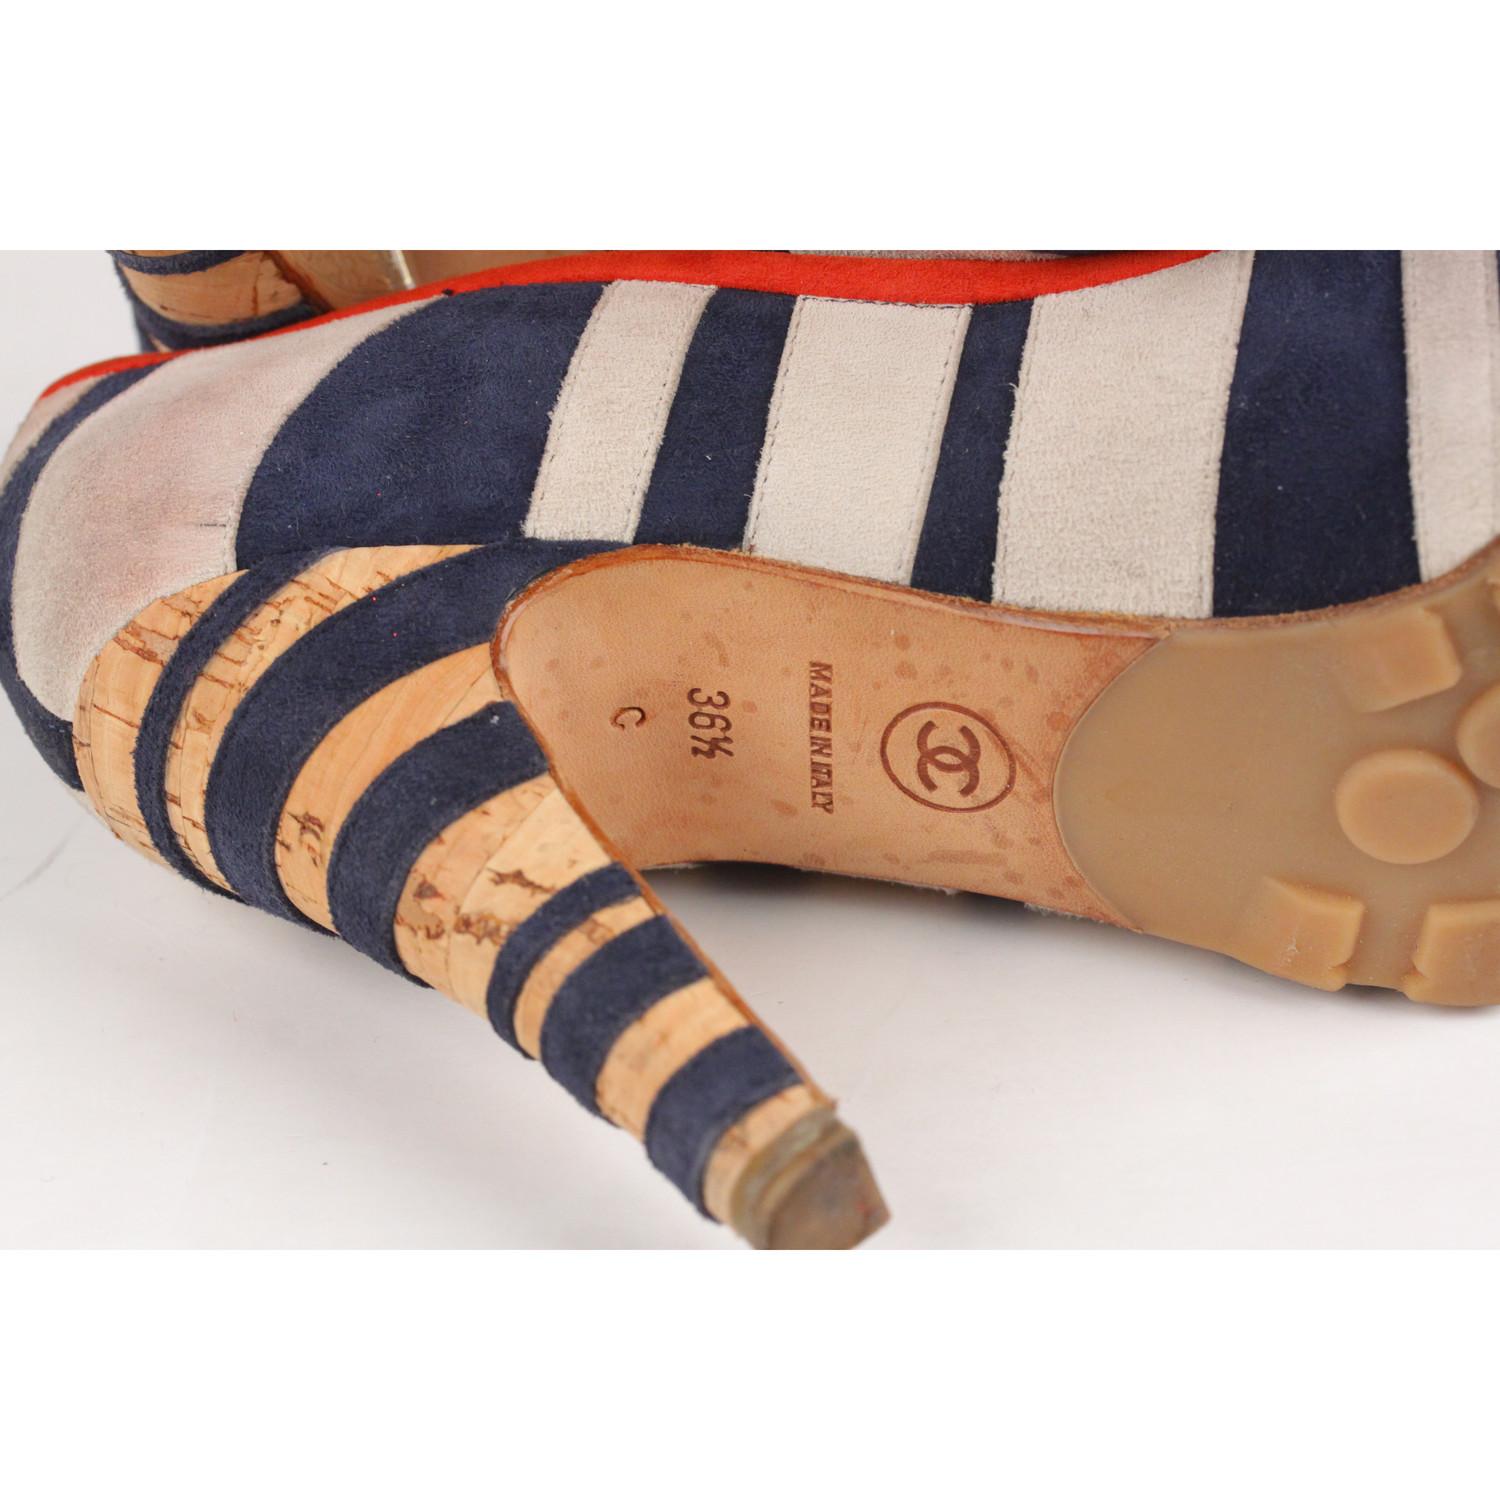 Chanel Red Navy White Suede Striped Pumps Heels Size 36.5 2